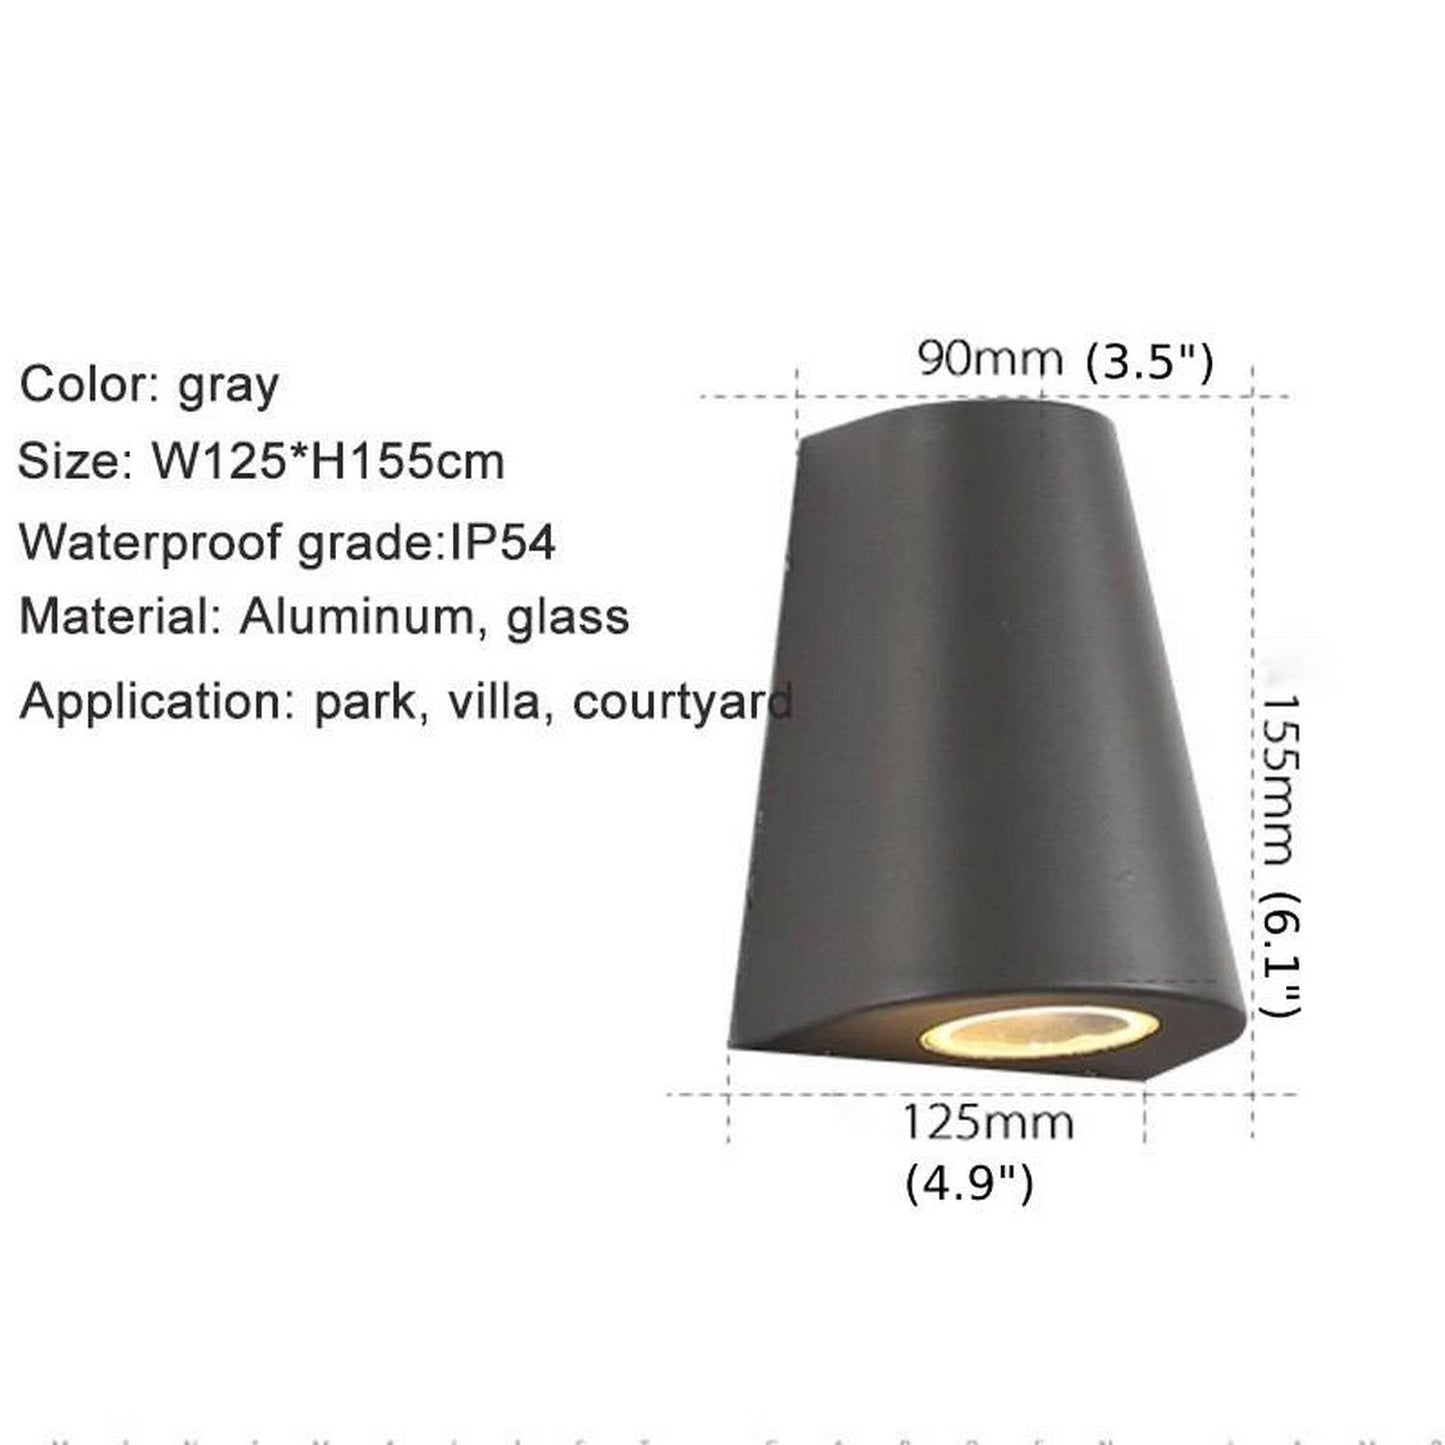 Black/Gray Outdoor Aluminum Waterproof LED Wall Lamps For Garden, porch